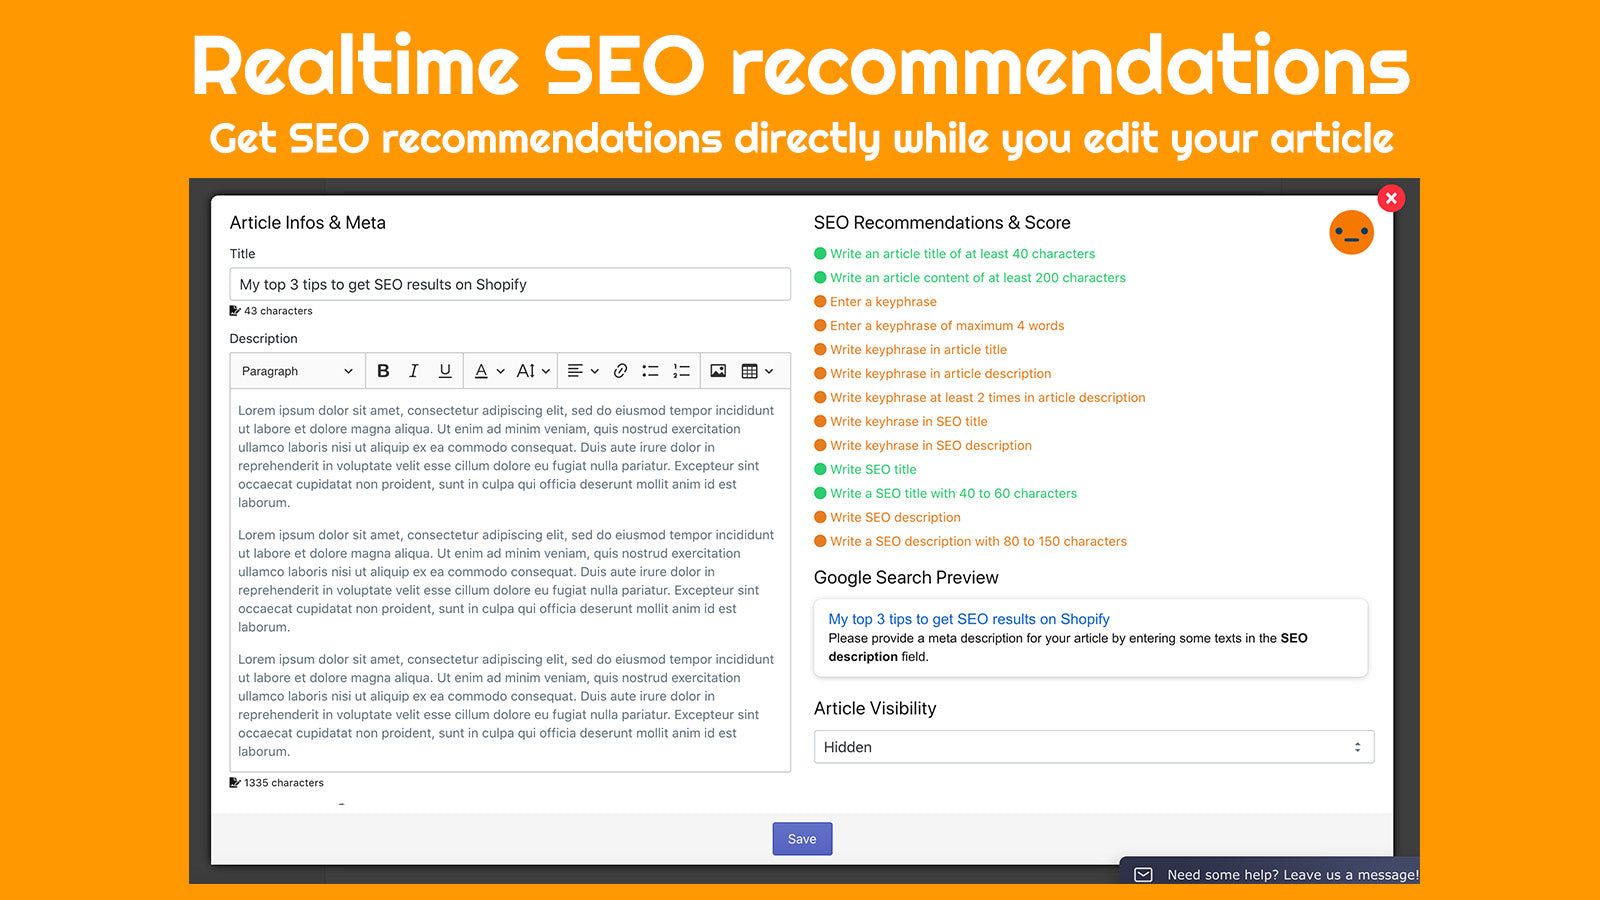 Get realtime SEO recommendations while you edit your article